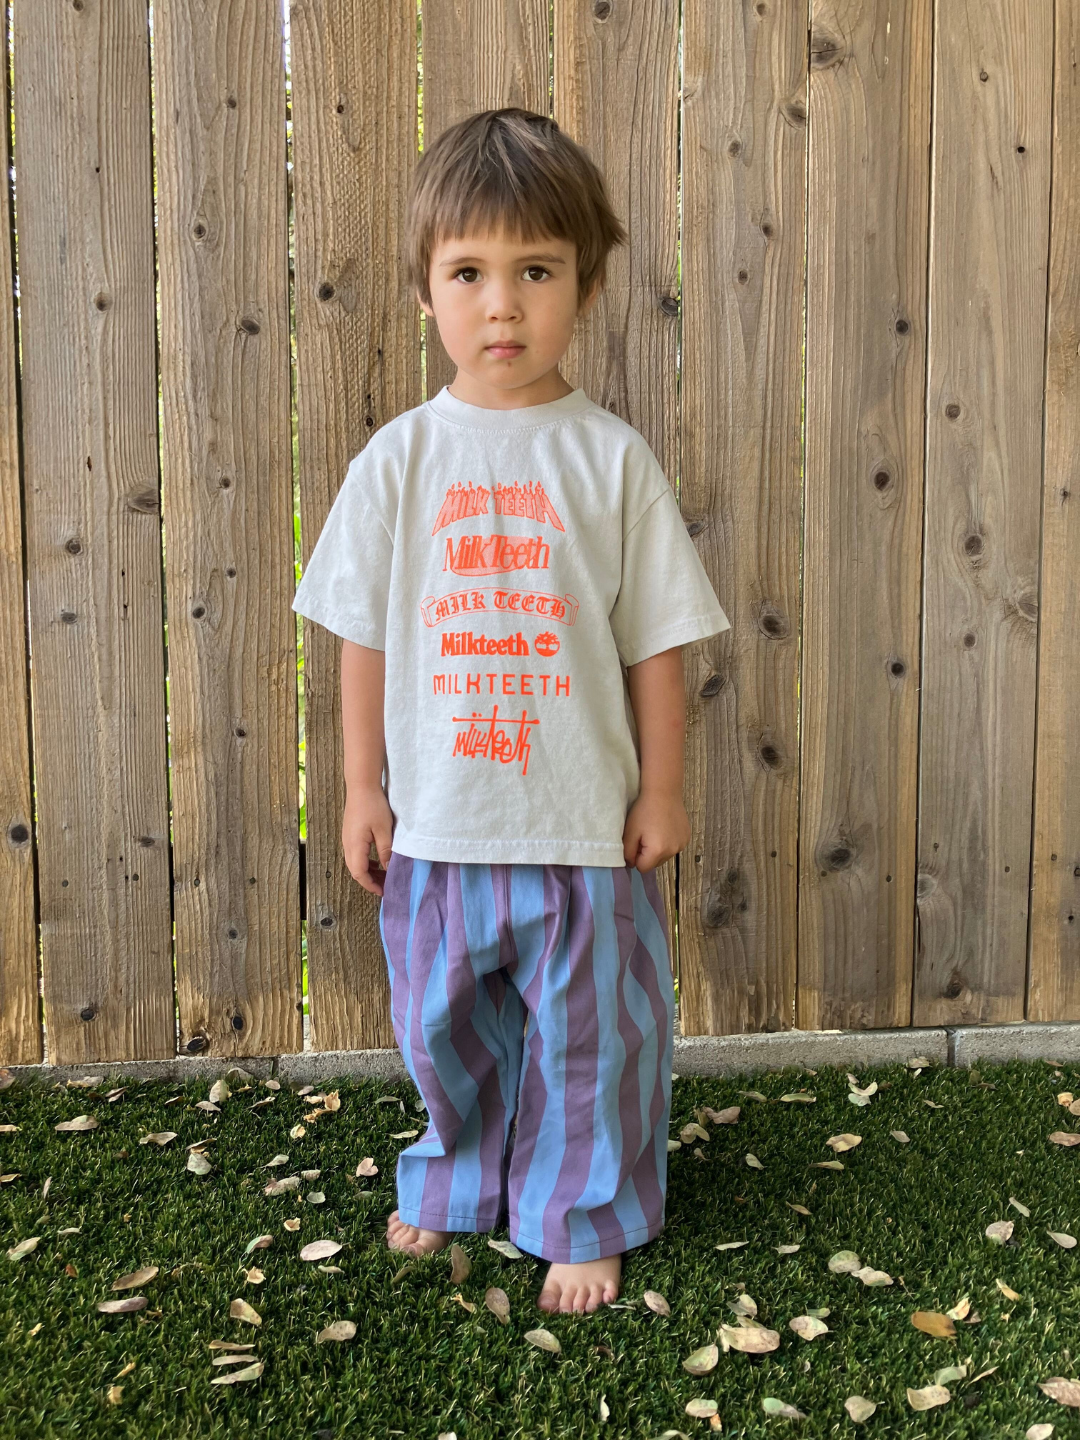 A child wearing a light grey t-shirt with Milk Teeth spelled out in various fonts in orange. He wears striped pants, is barefoot, and stands on grass against a wooden fence.